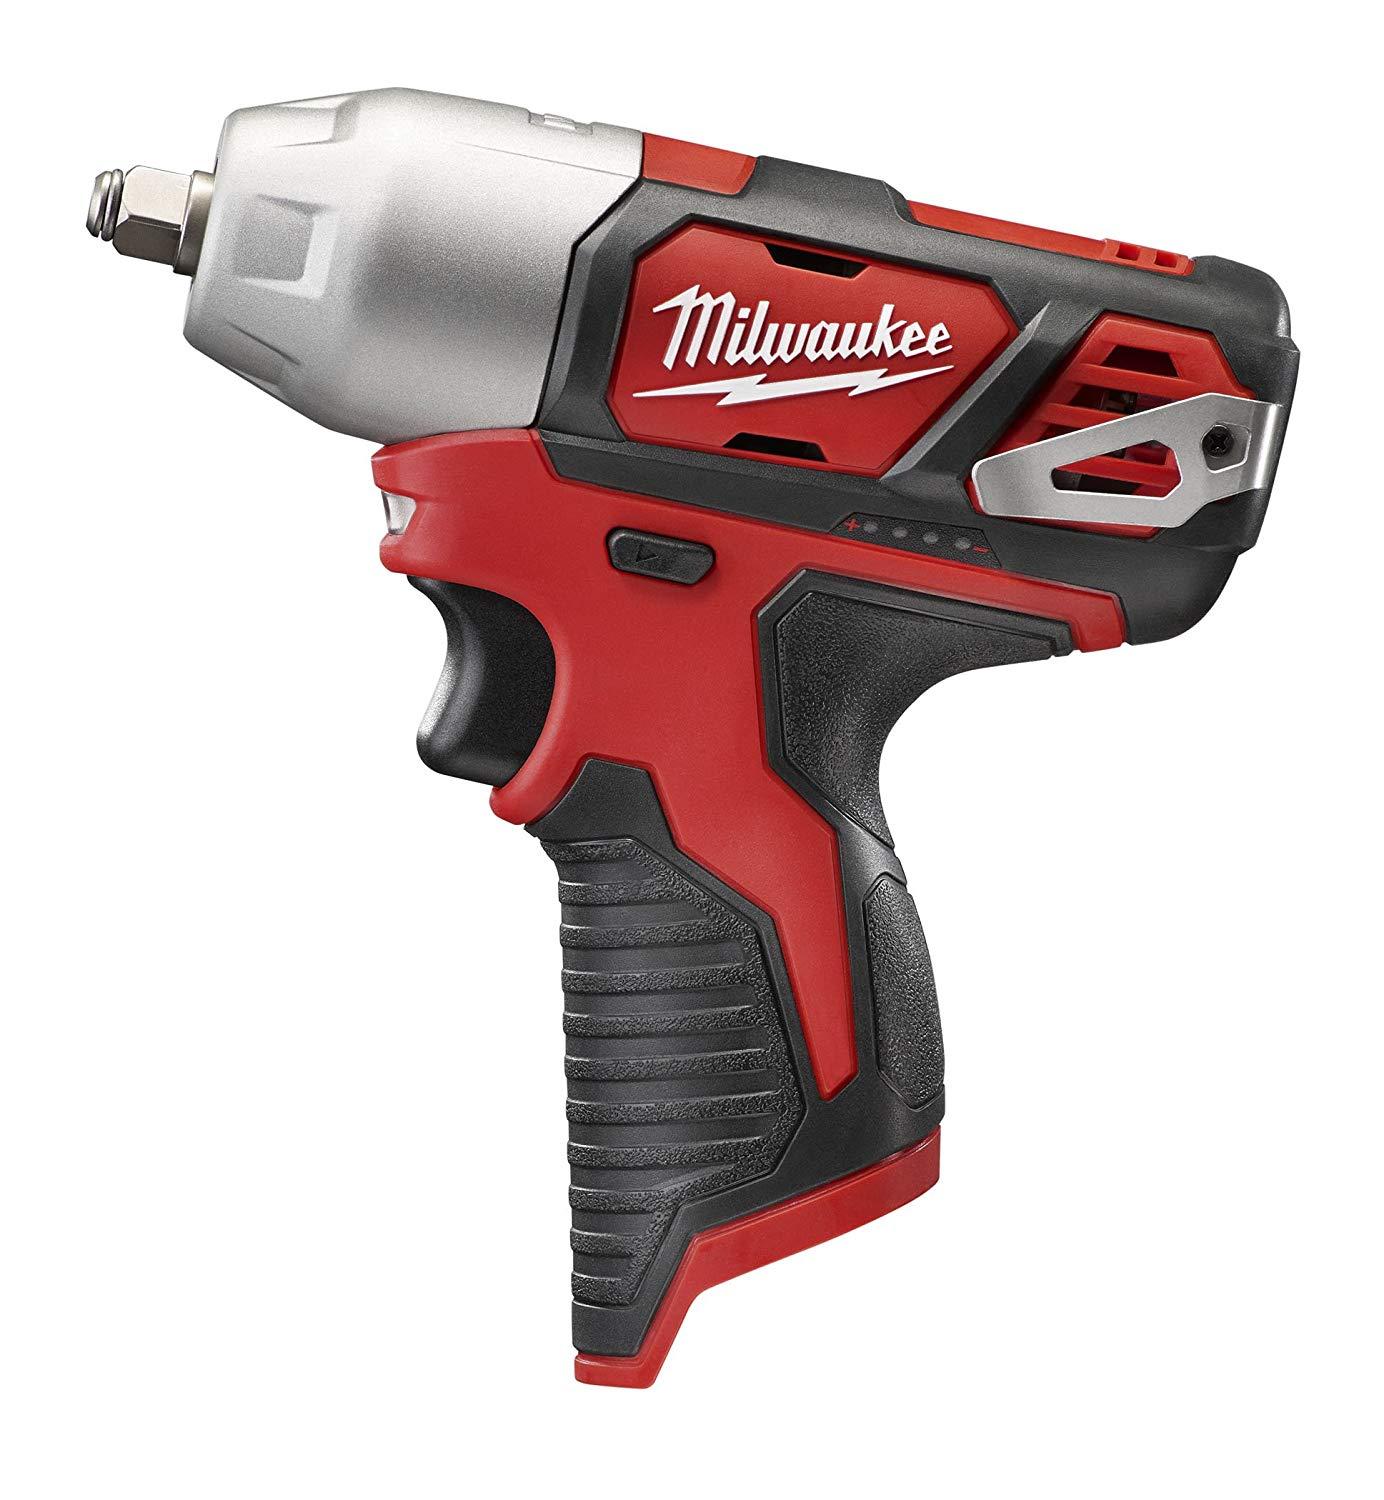 Milwaukee® M12™ 2462-22 Compact Lightweight Cordless Impact Driver Kit, 1/4 in Hex Drive, 0 to 3300 bpm, 1000 in-lb Torque, 12 VAC, 6-3/8 in OAL